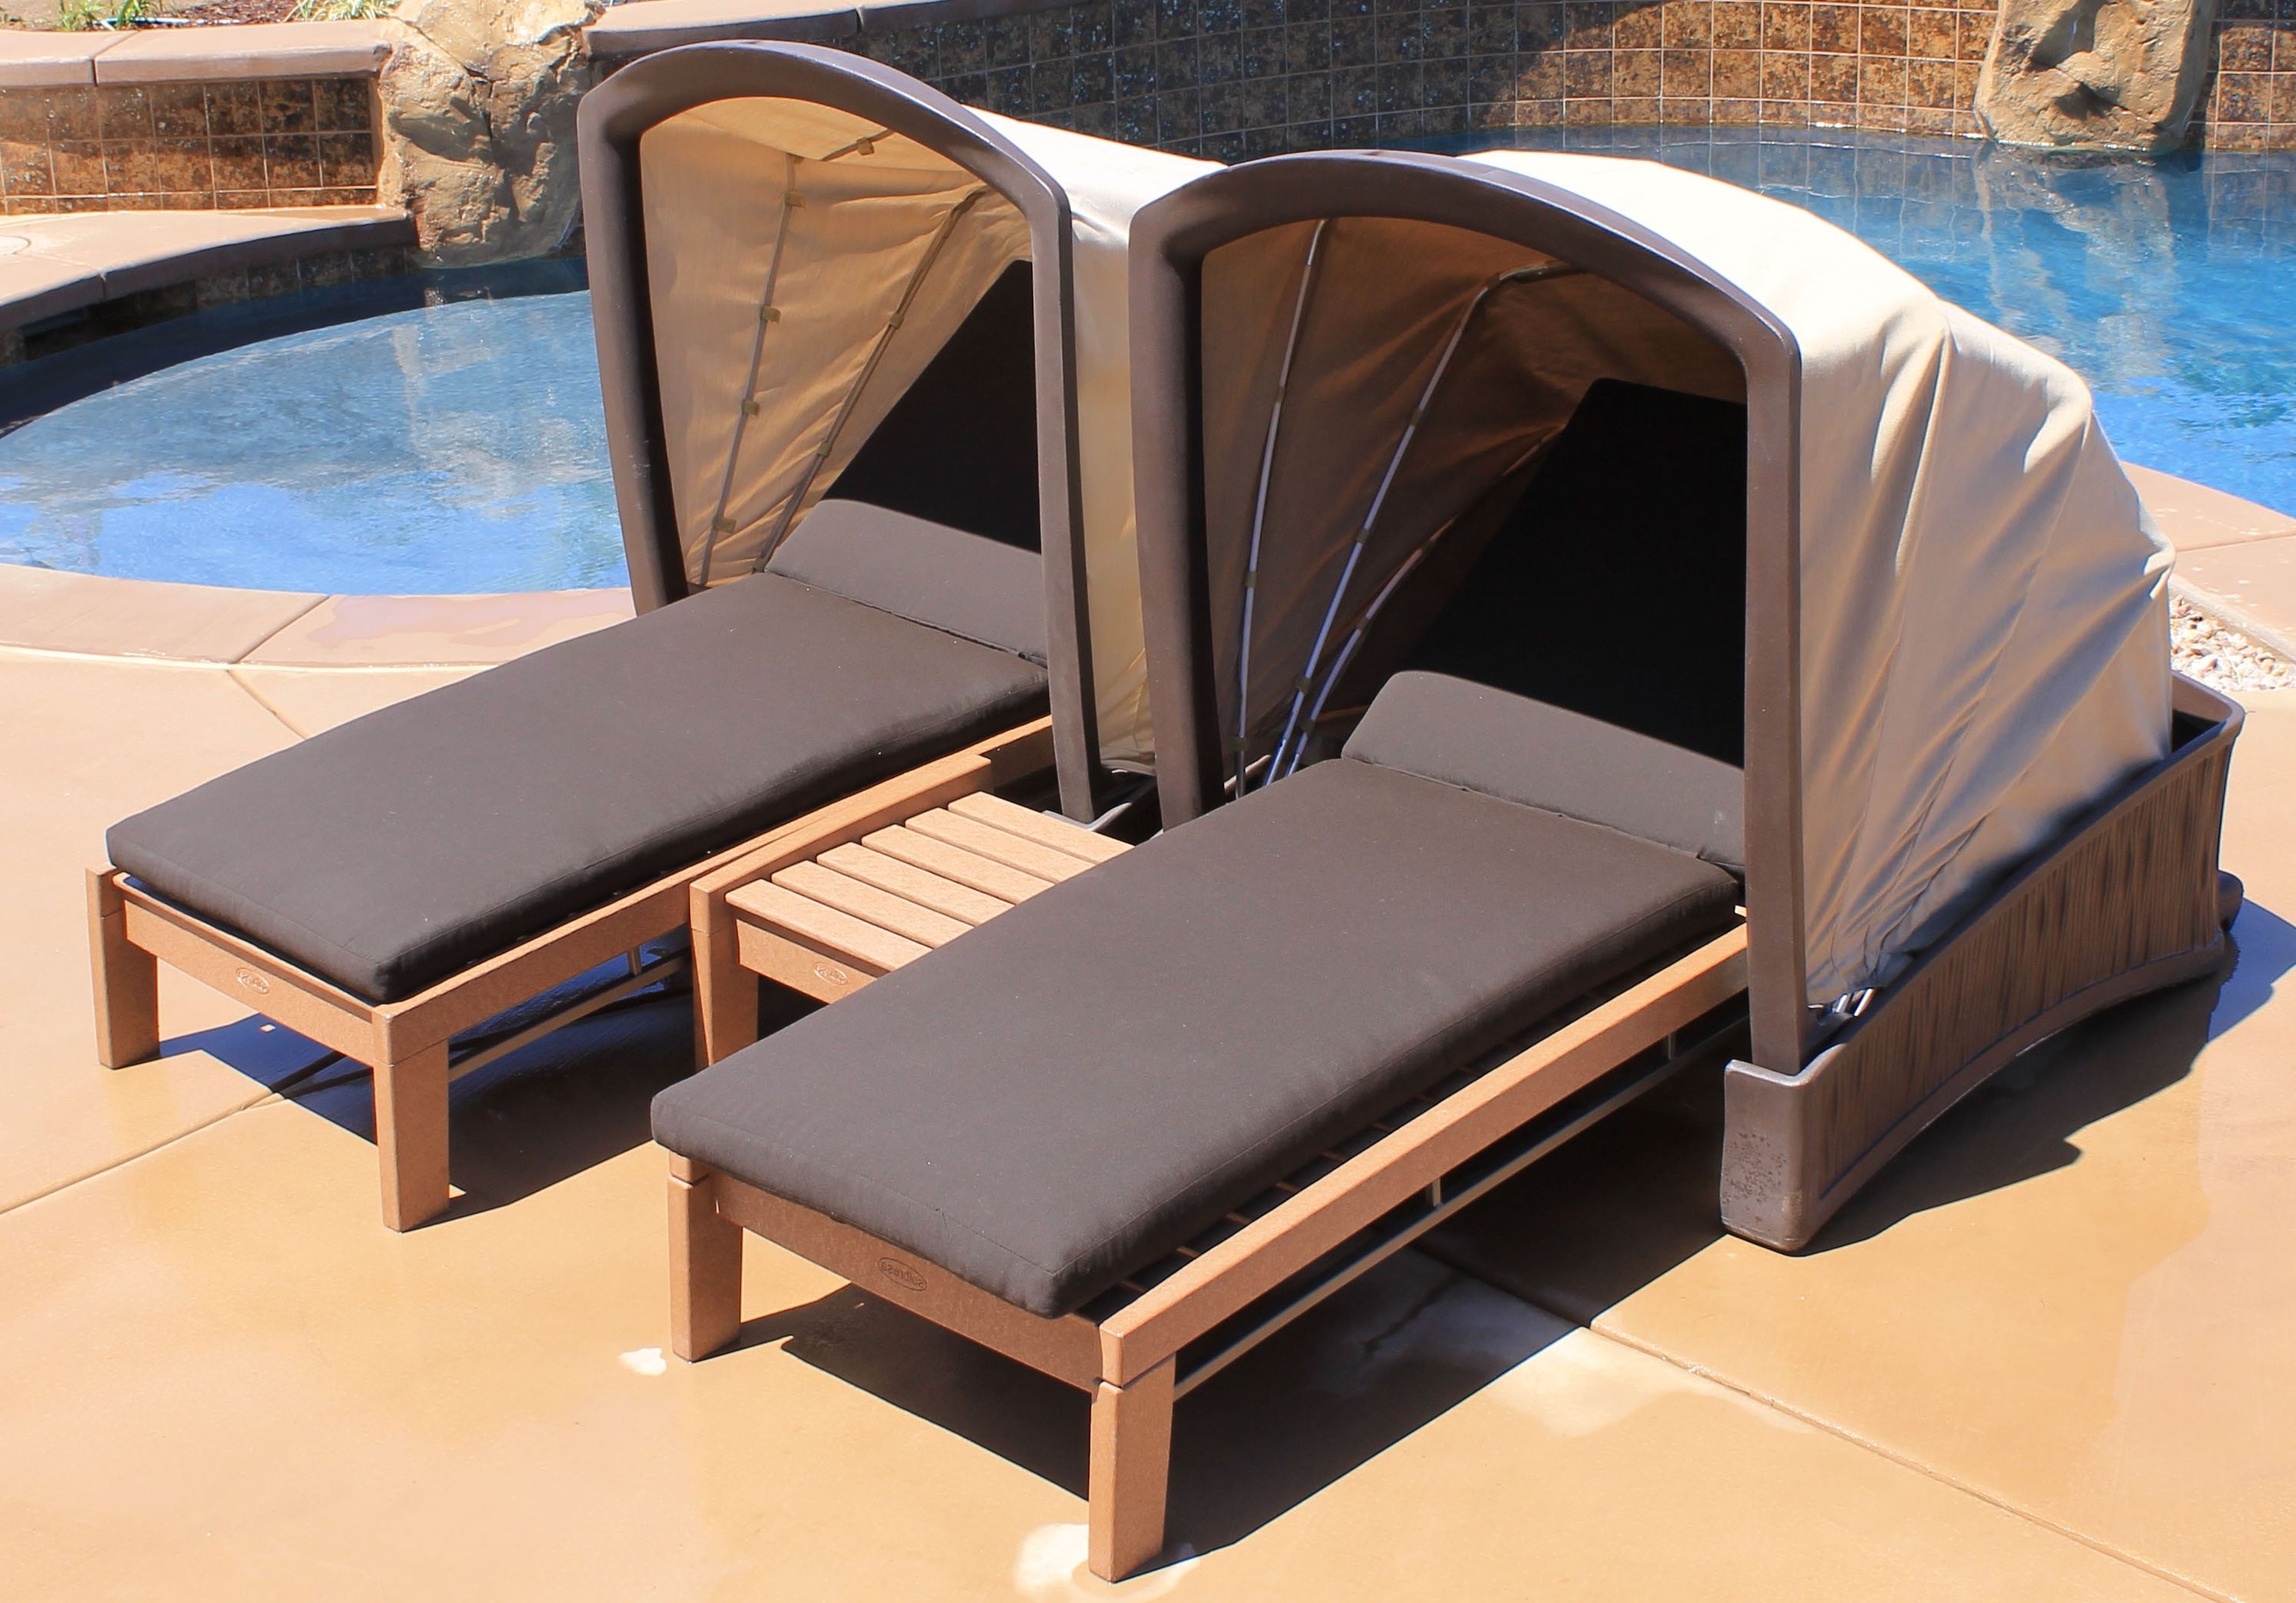 Outdoor Chaise Lounge Chairs With Canopy With Current Outdoor Chaise Lounge Chairs With Canopy • Lounge Chairs Ideas (View 1 of 15)